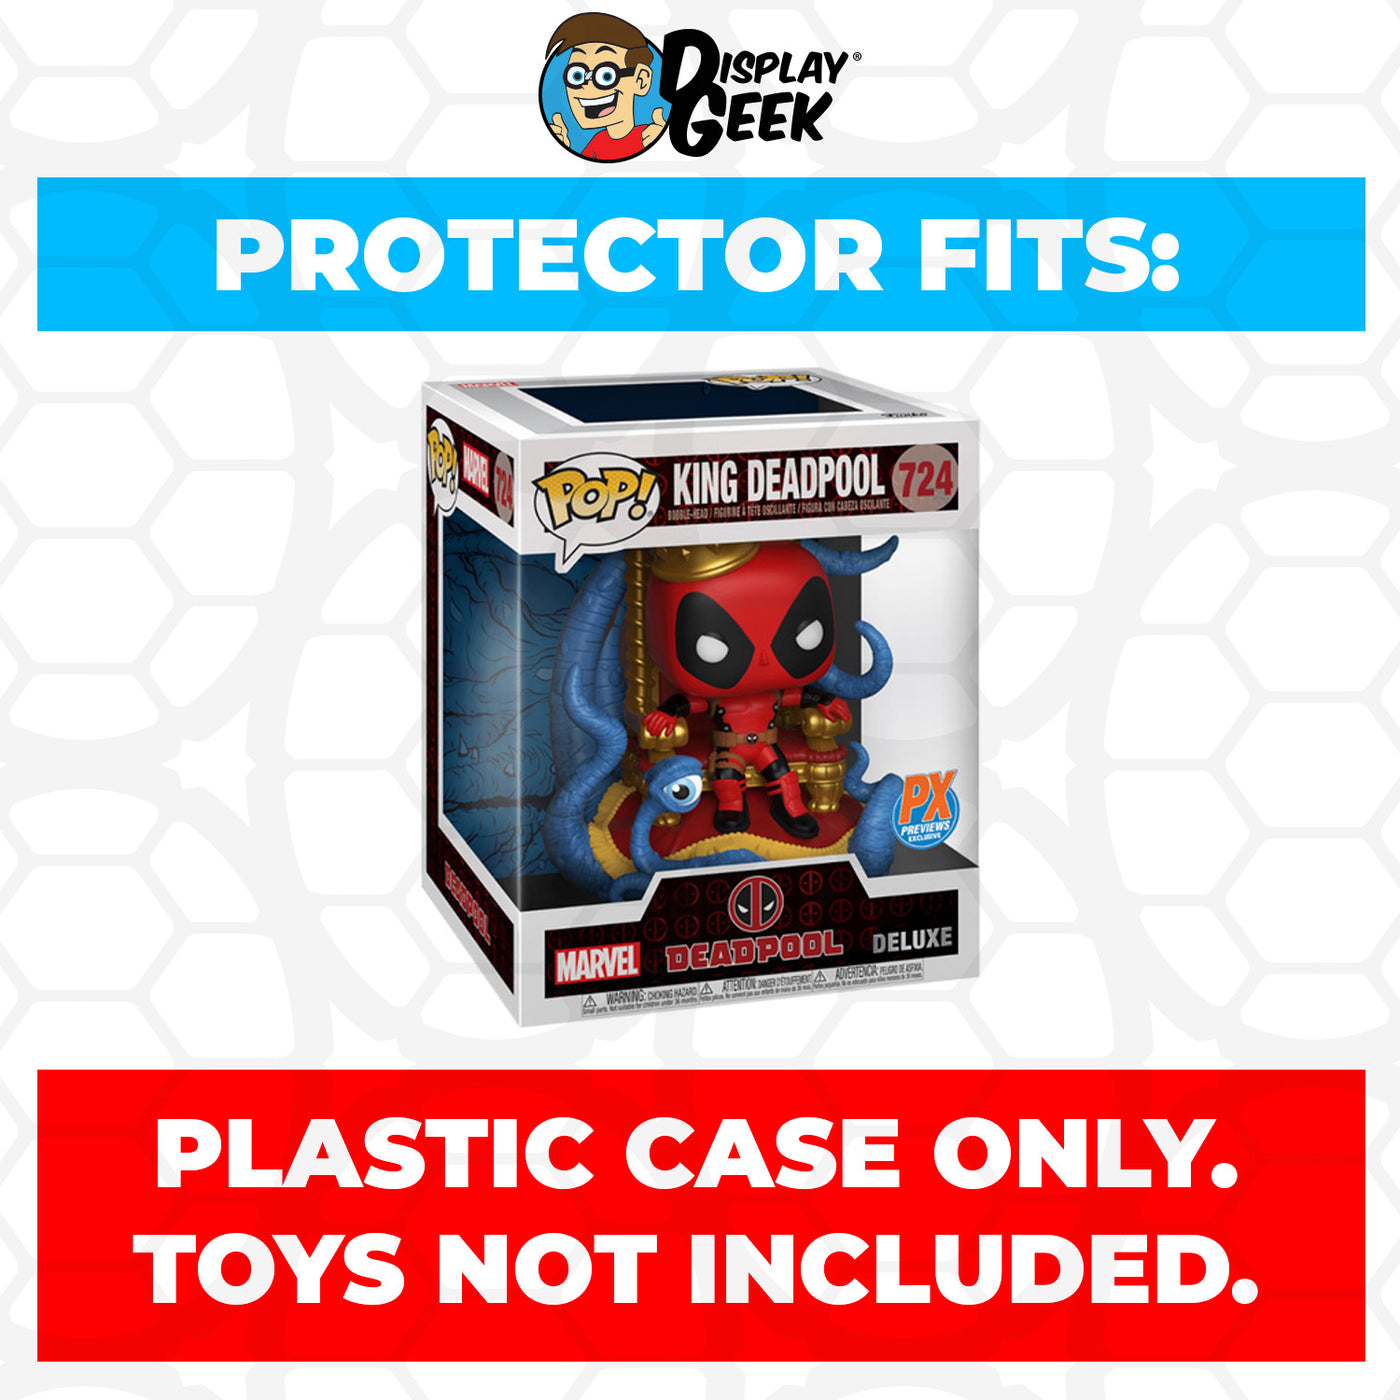 Pop Protector for King Deadpool on Throne #724 Funko Pop Deluxe on The Protector Guide App by Display Geek